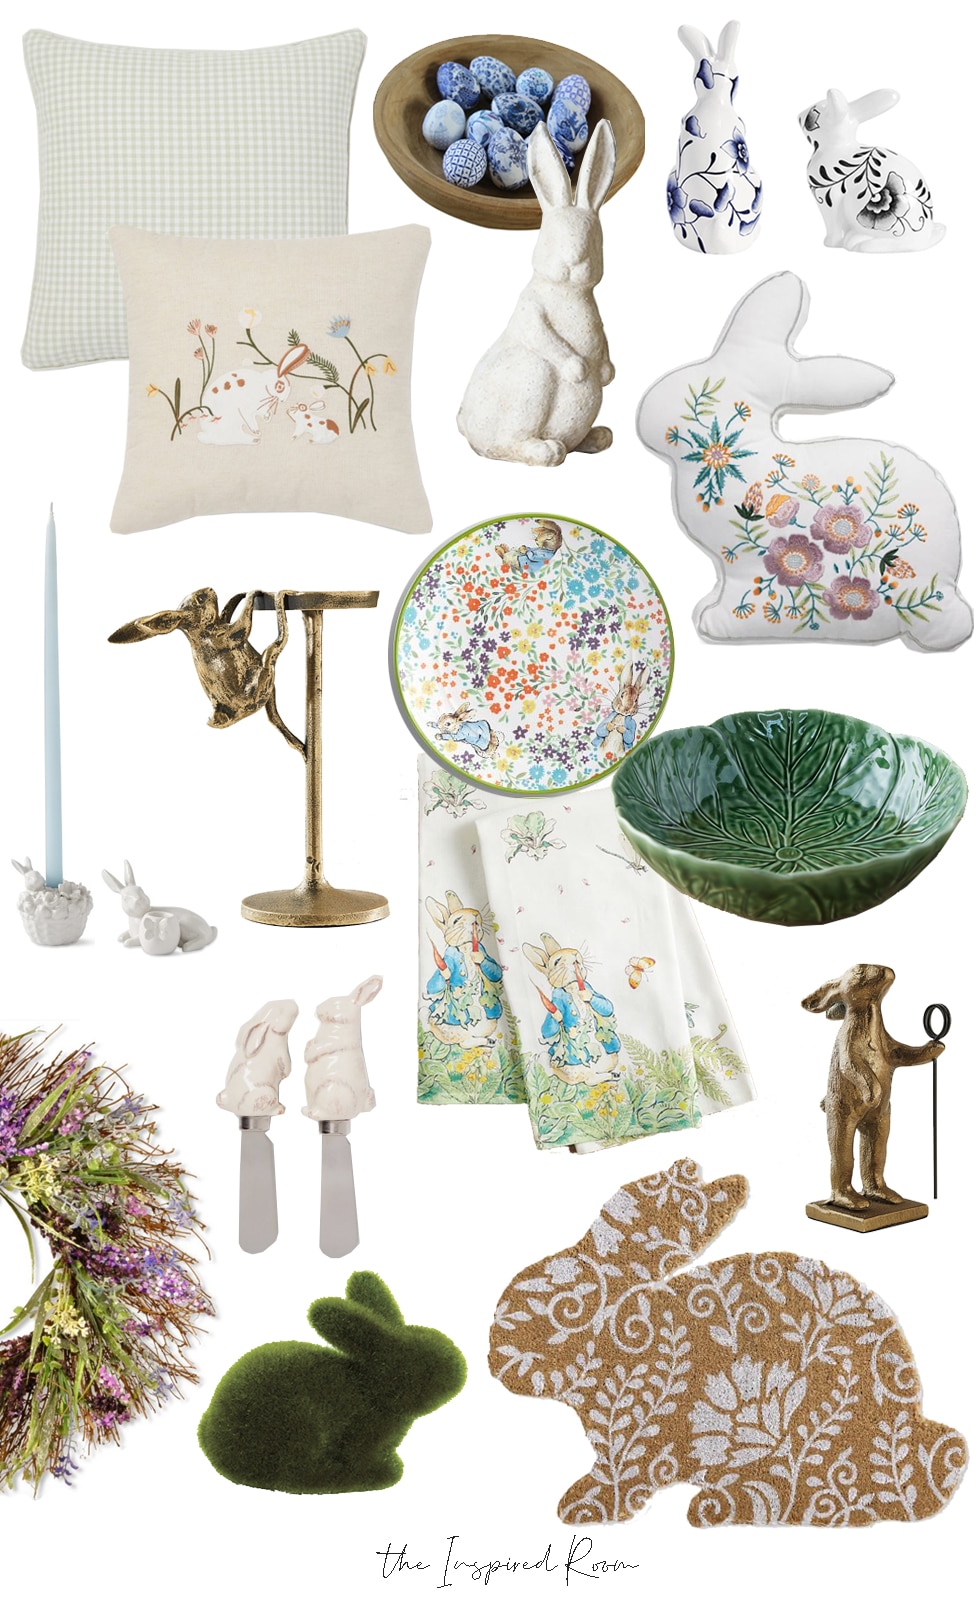 Easter Decor, Gifts + Mood Boards (2022) - The Inspired Room